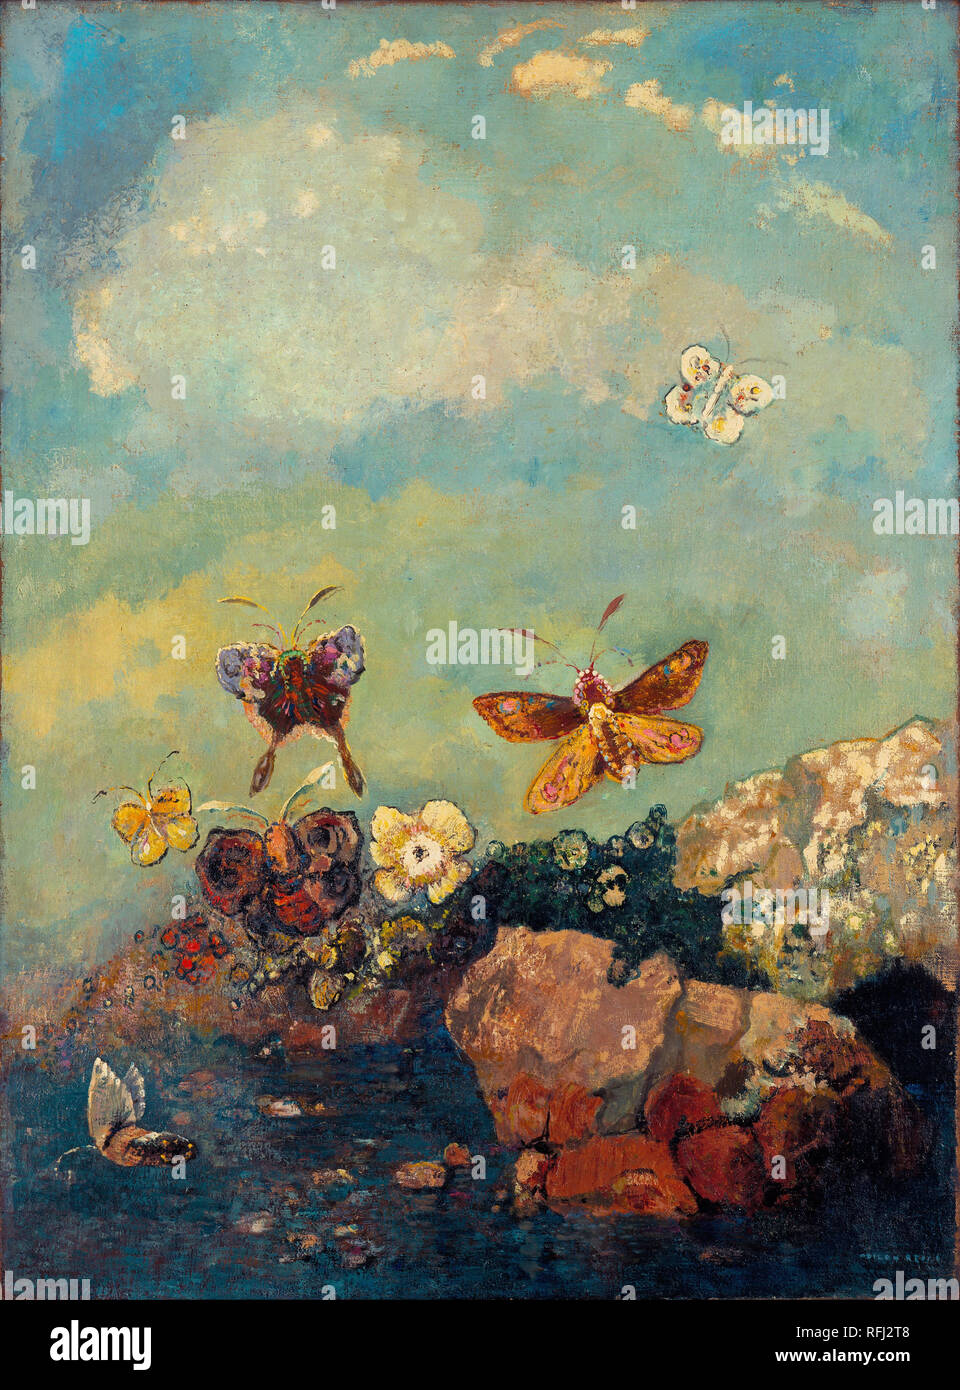 Butterflies. Date/Period: Ca. 1910. Painting. Oil on canvas. Height: 739 mm (29.09 in); Width: 549 mm (21.61 in). Author: Odilon Redon. REDON, ODILON. Stock Photo